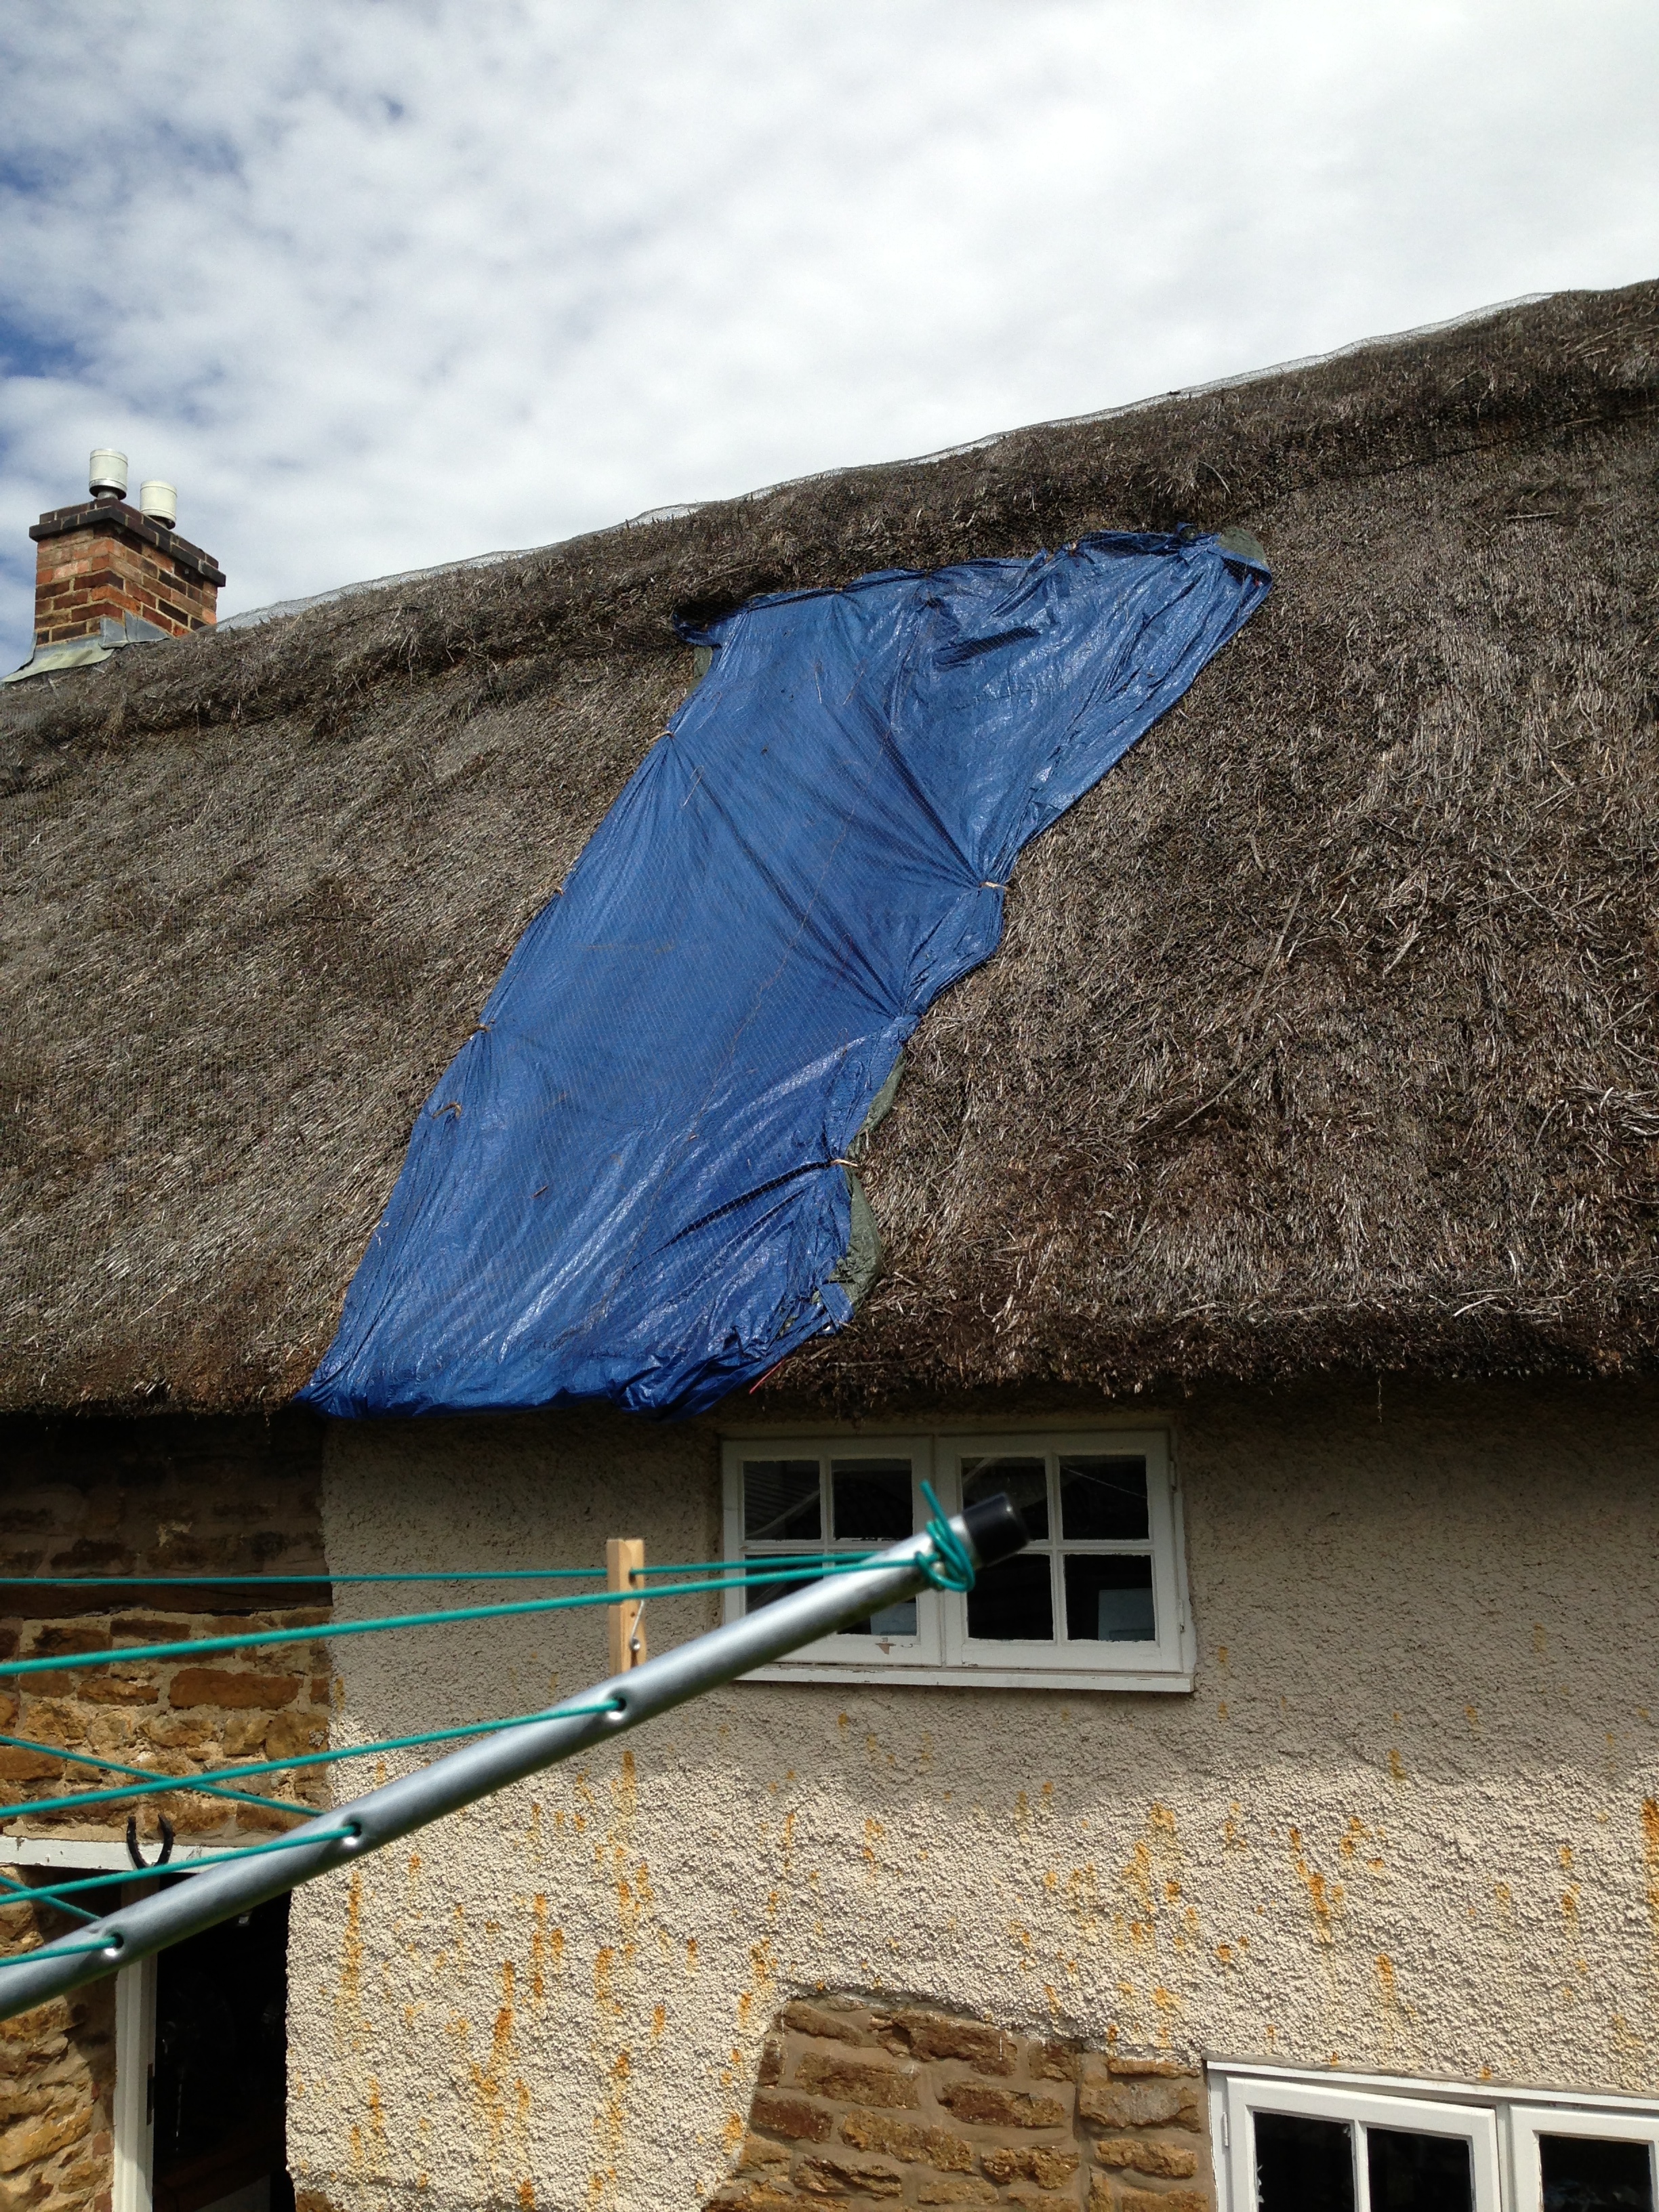 Do Thatched Roofs Leak?